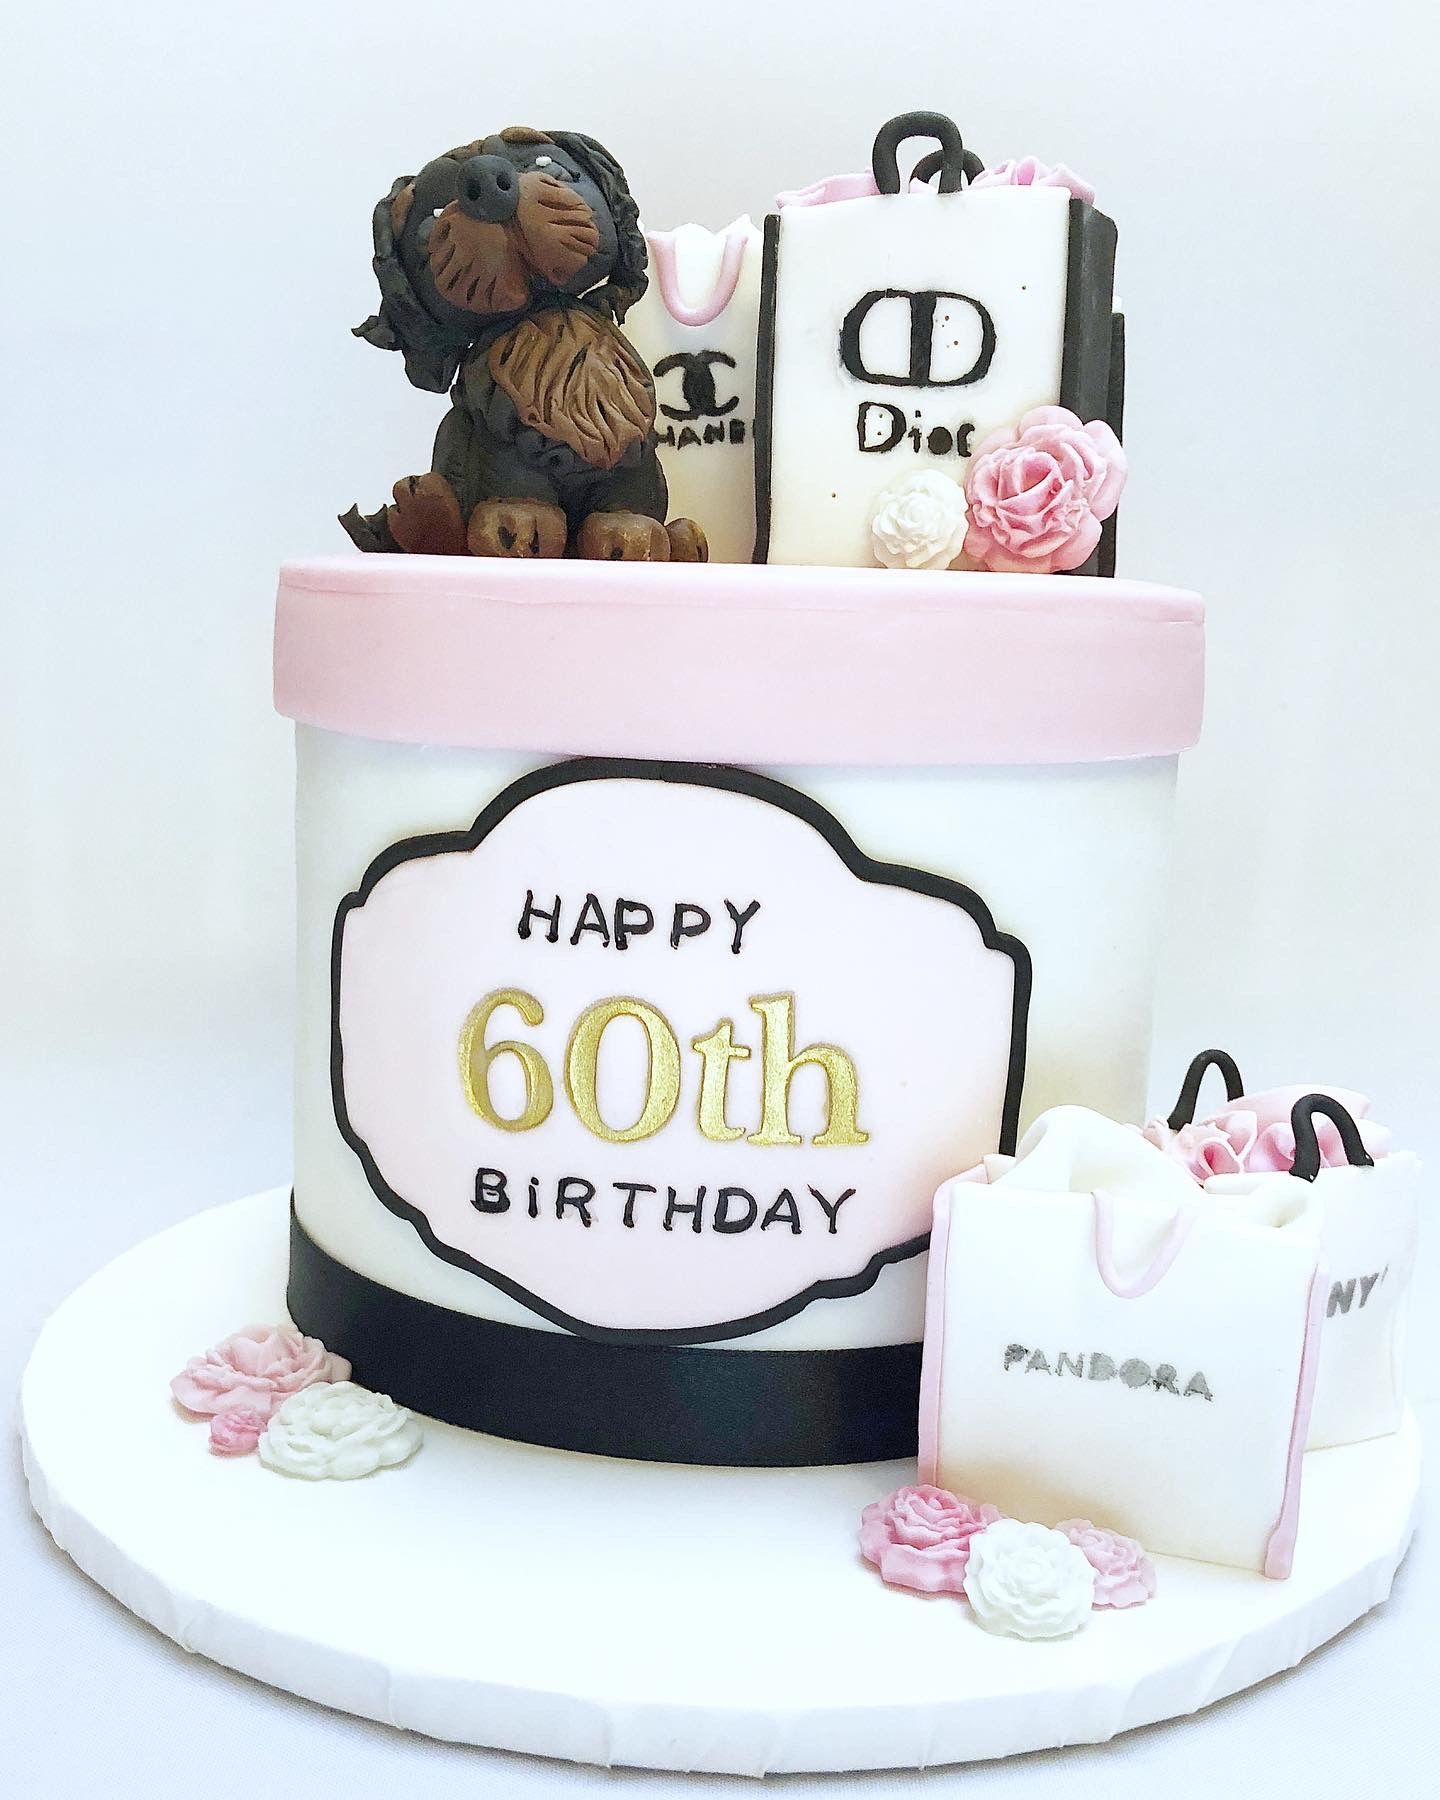 Shopaholic themed cake. The cake is beautifully decorated as a hat box in pastel pink, white and black, with Happy 60th Birthday in gold fondant on the front side of the cake. Fondant shopping bags and a little fondant dog sit atop the cake.